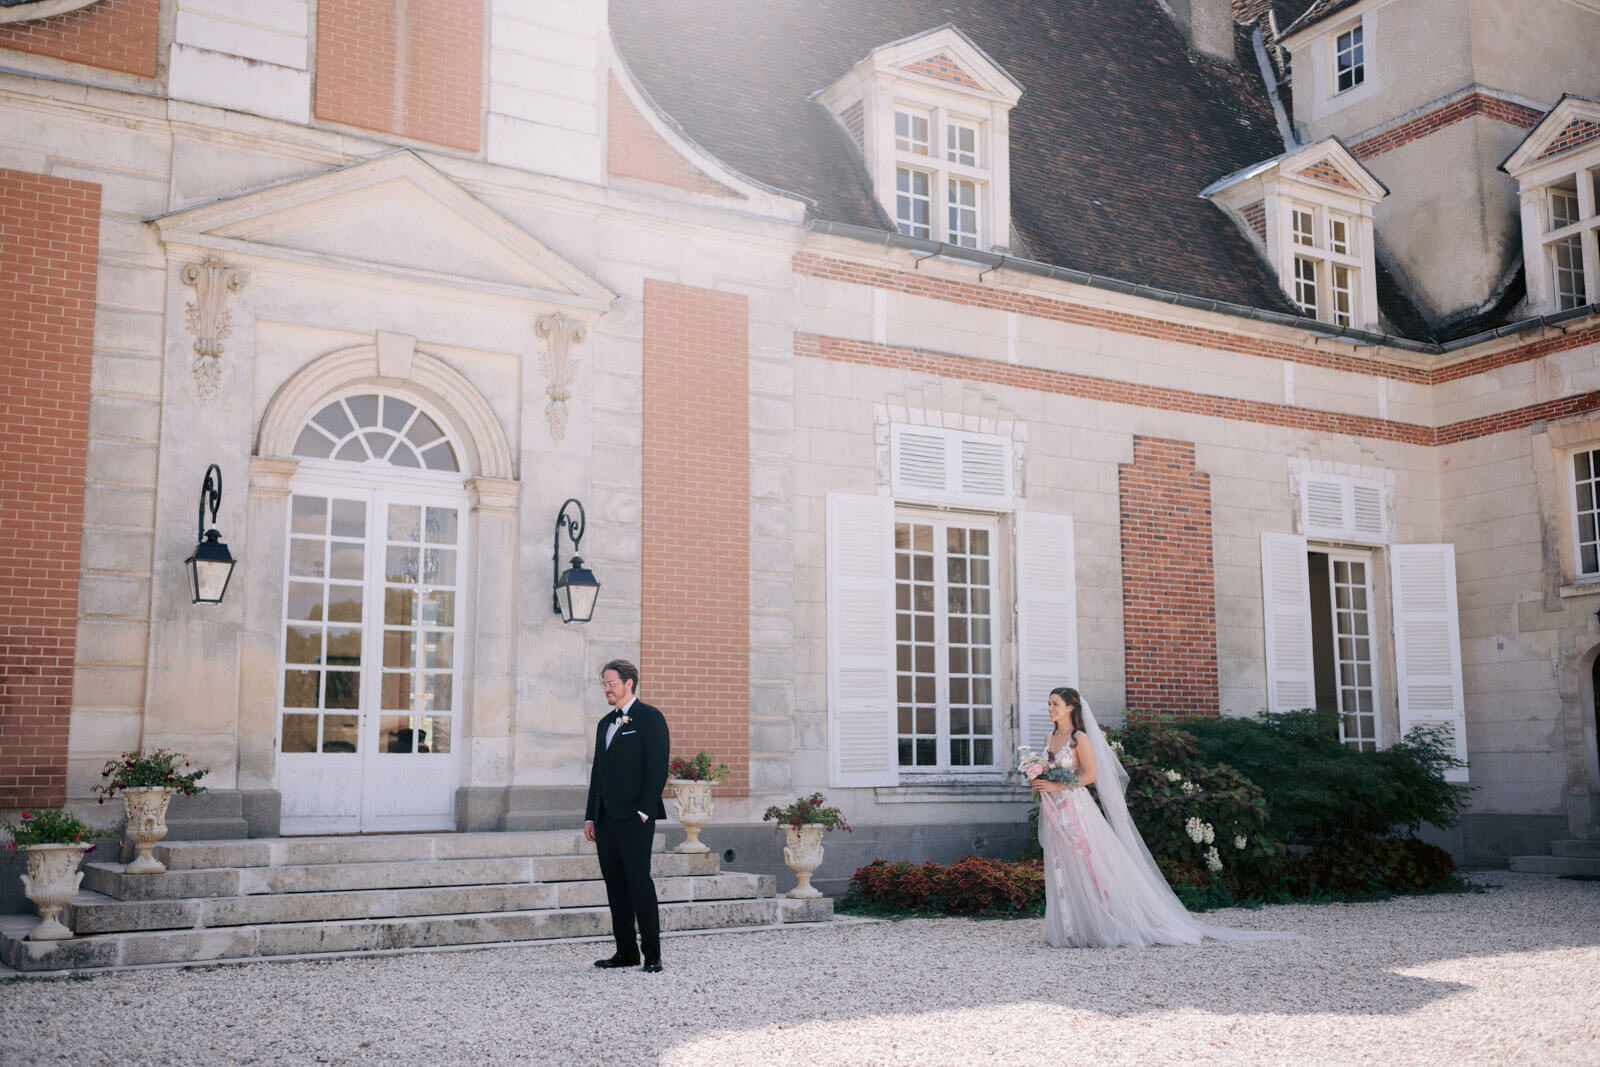 First look of the bride and the groom in front of a castle. Best outdoor lover's wedding destination. Image by Jenny Fu